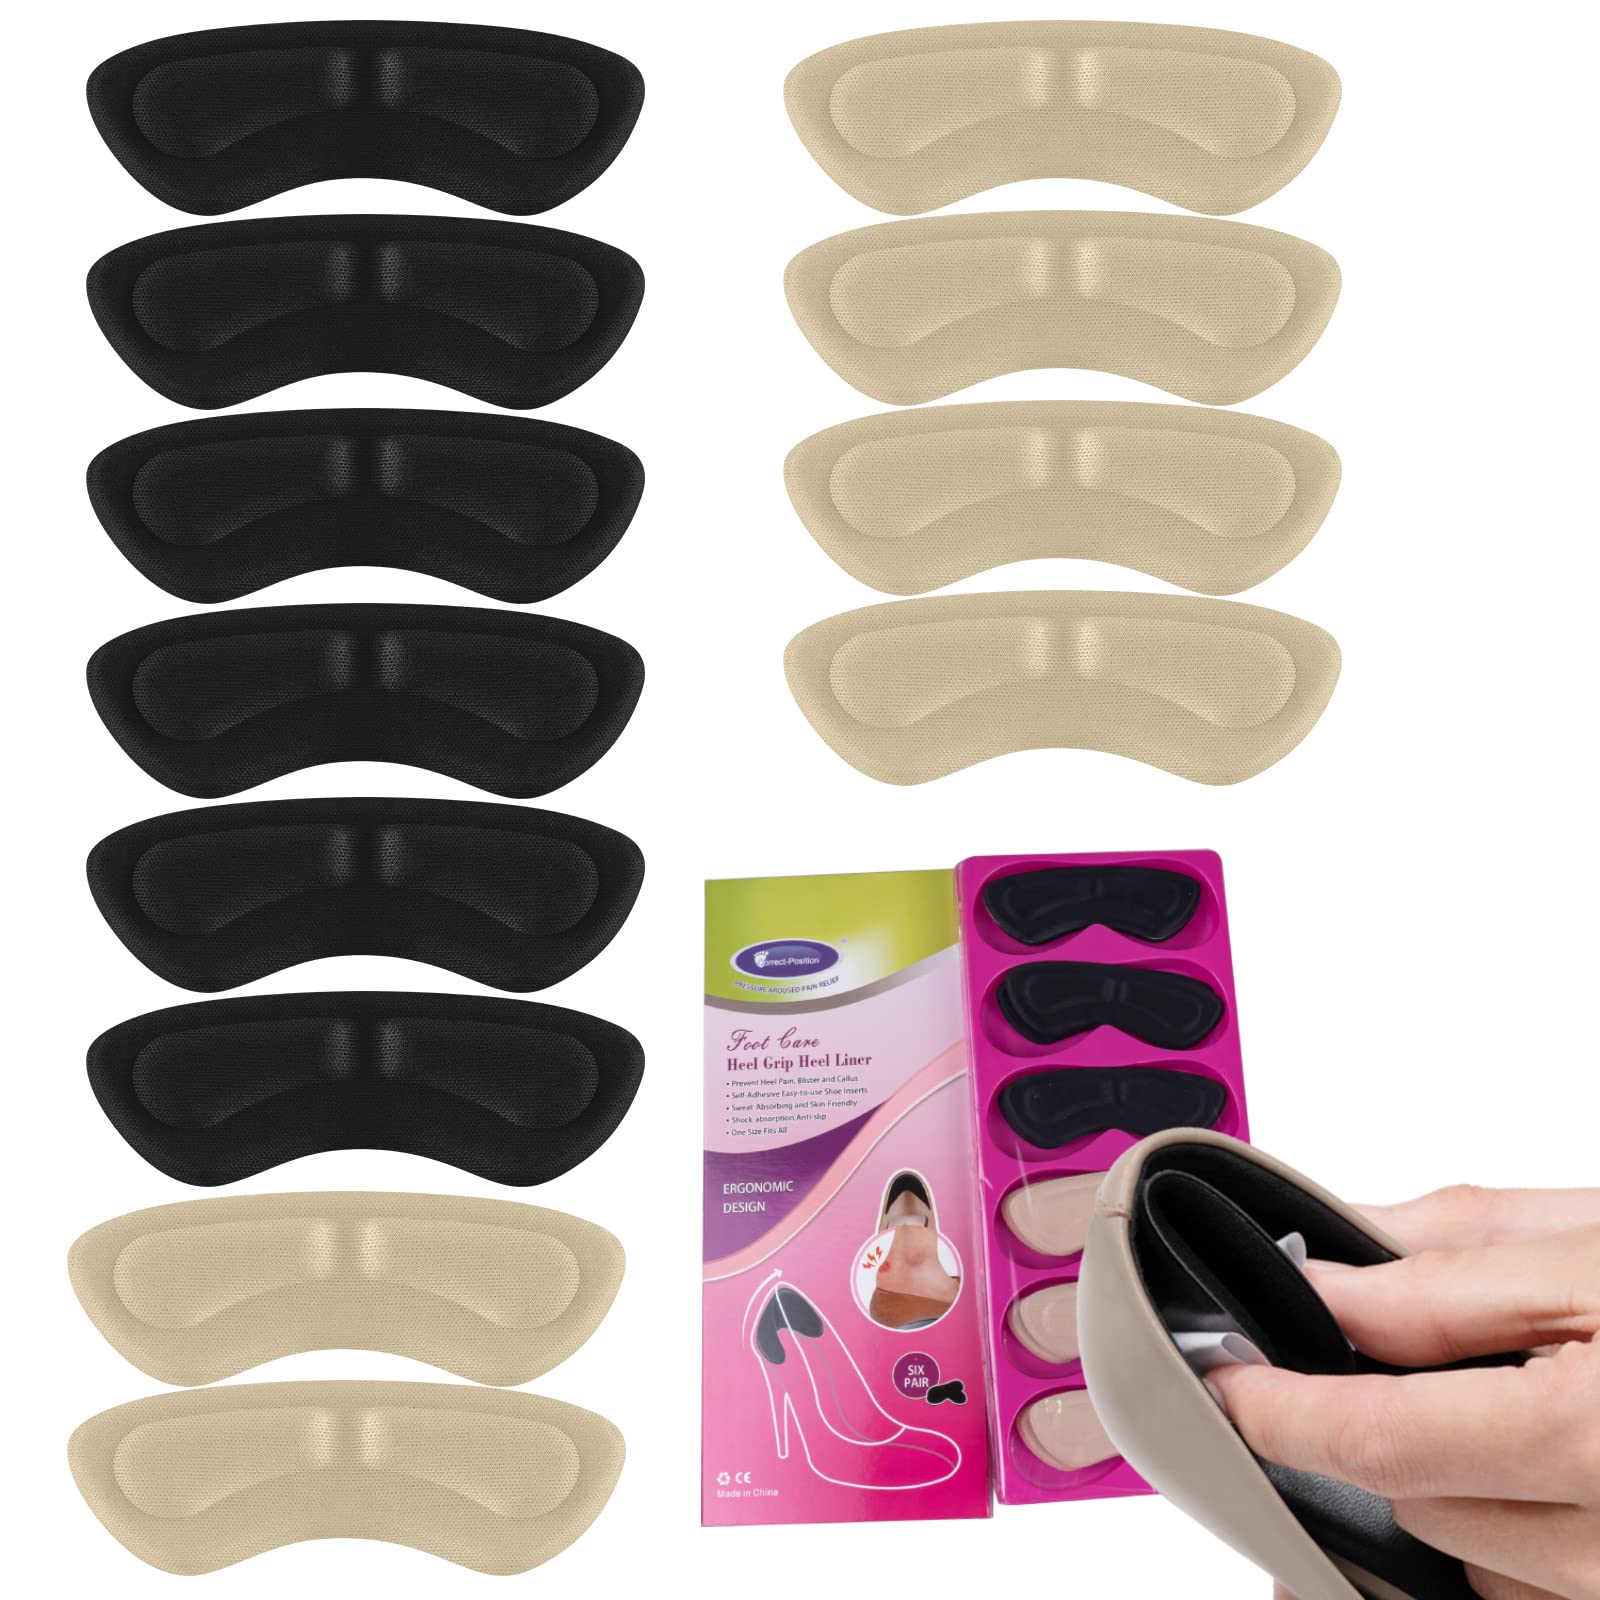 4PCS Heel Pads for Shoes That are Too Big, Heel Inserts for Women, Heel  Grips for Womens Shoes, Heel Protectors, Heel Cushion Liners for Blisters  Loose Shoes, Shoe Fillers - Walmart.com